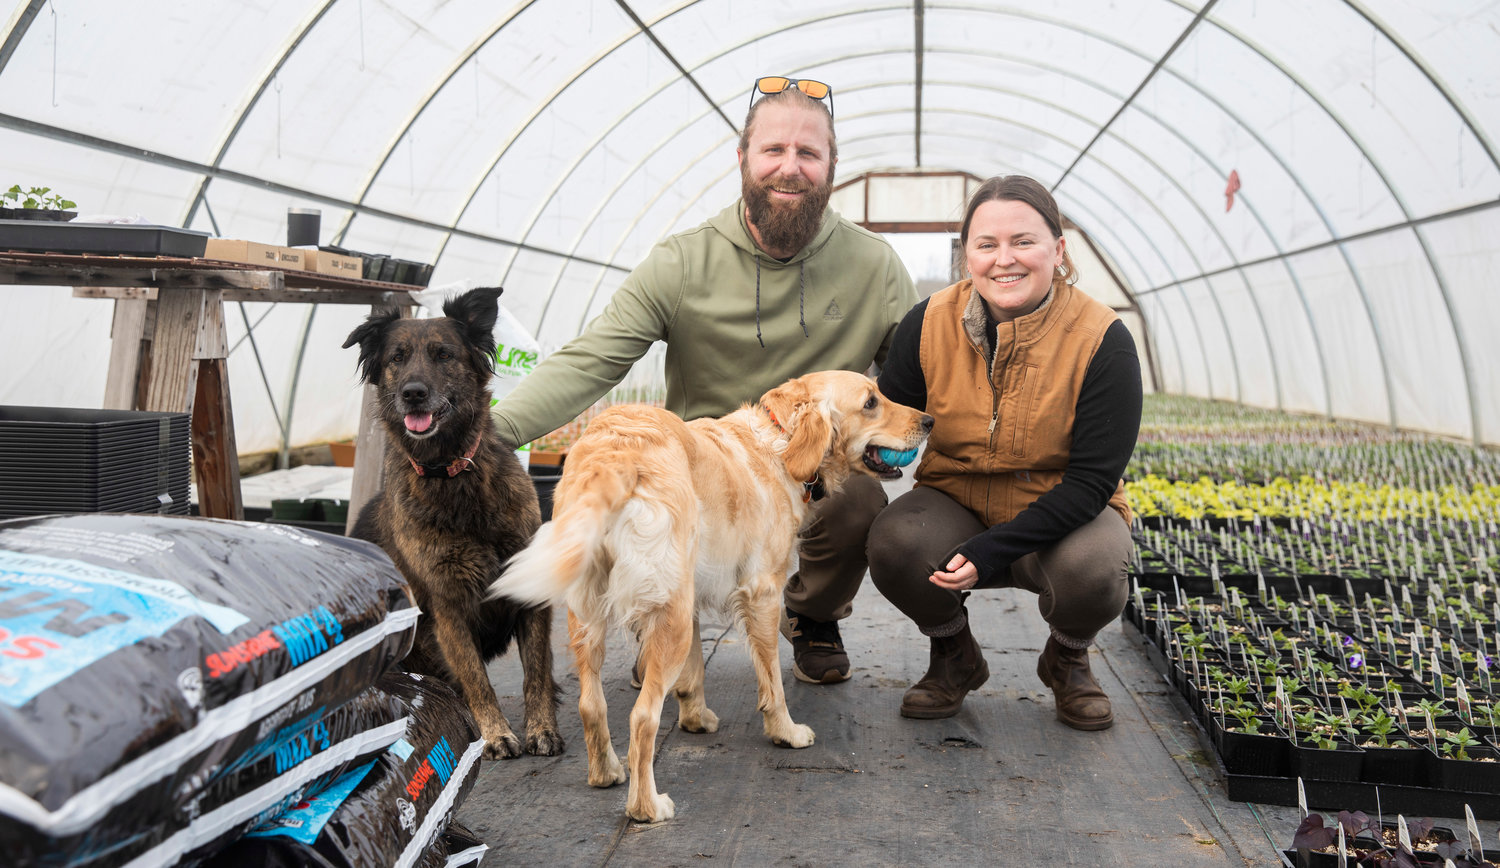 Kyle and Jena Aselton pose for a photo with their dogs Birdy and Willow at the Dirty Thumb Nursery along state Route 6 near Adna on Wednesday.